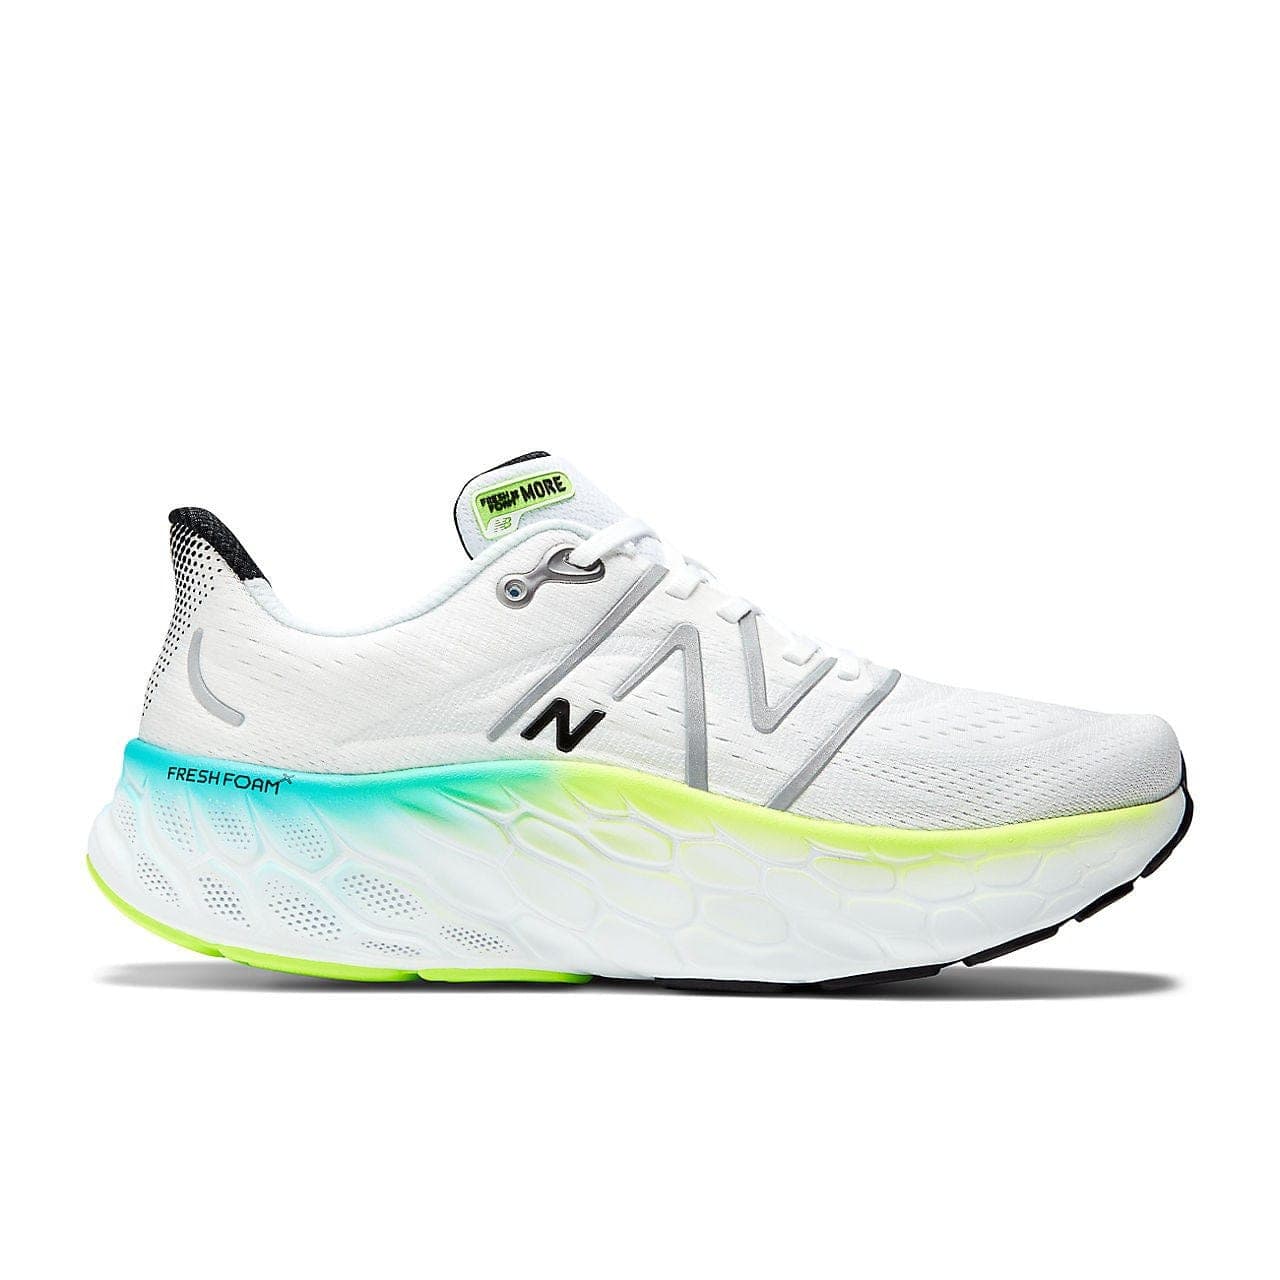 https://cdn.shopify.com/s/files/1/0004/0386/5636/products/new-balance-fresh-foam-more-v4-mens-white-with-electric-teal-41445885673700.jpg?v=1672679468&width=2560